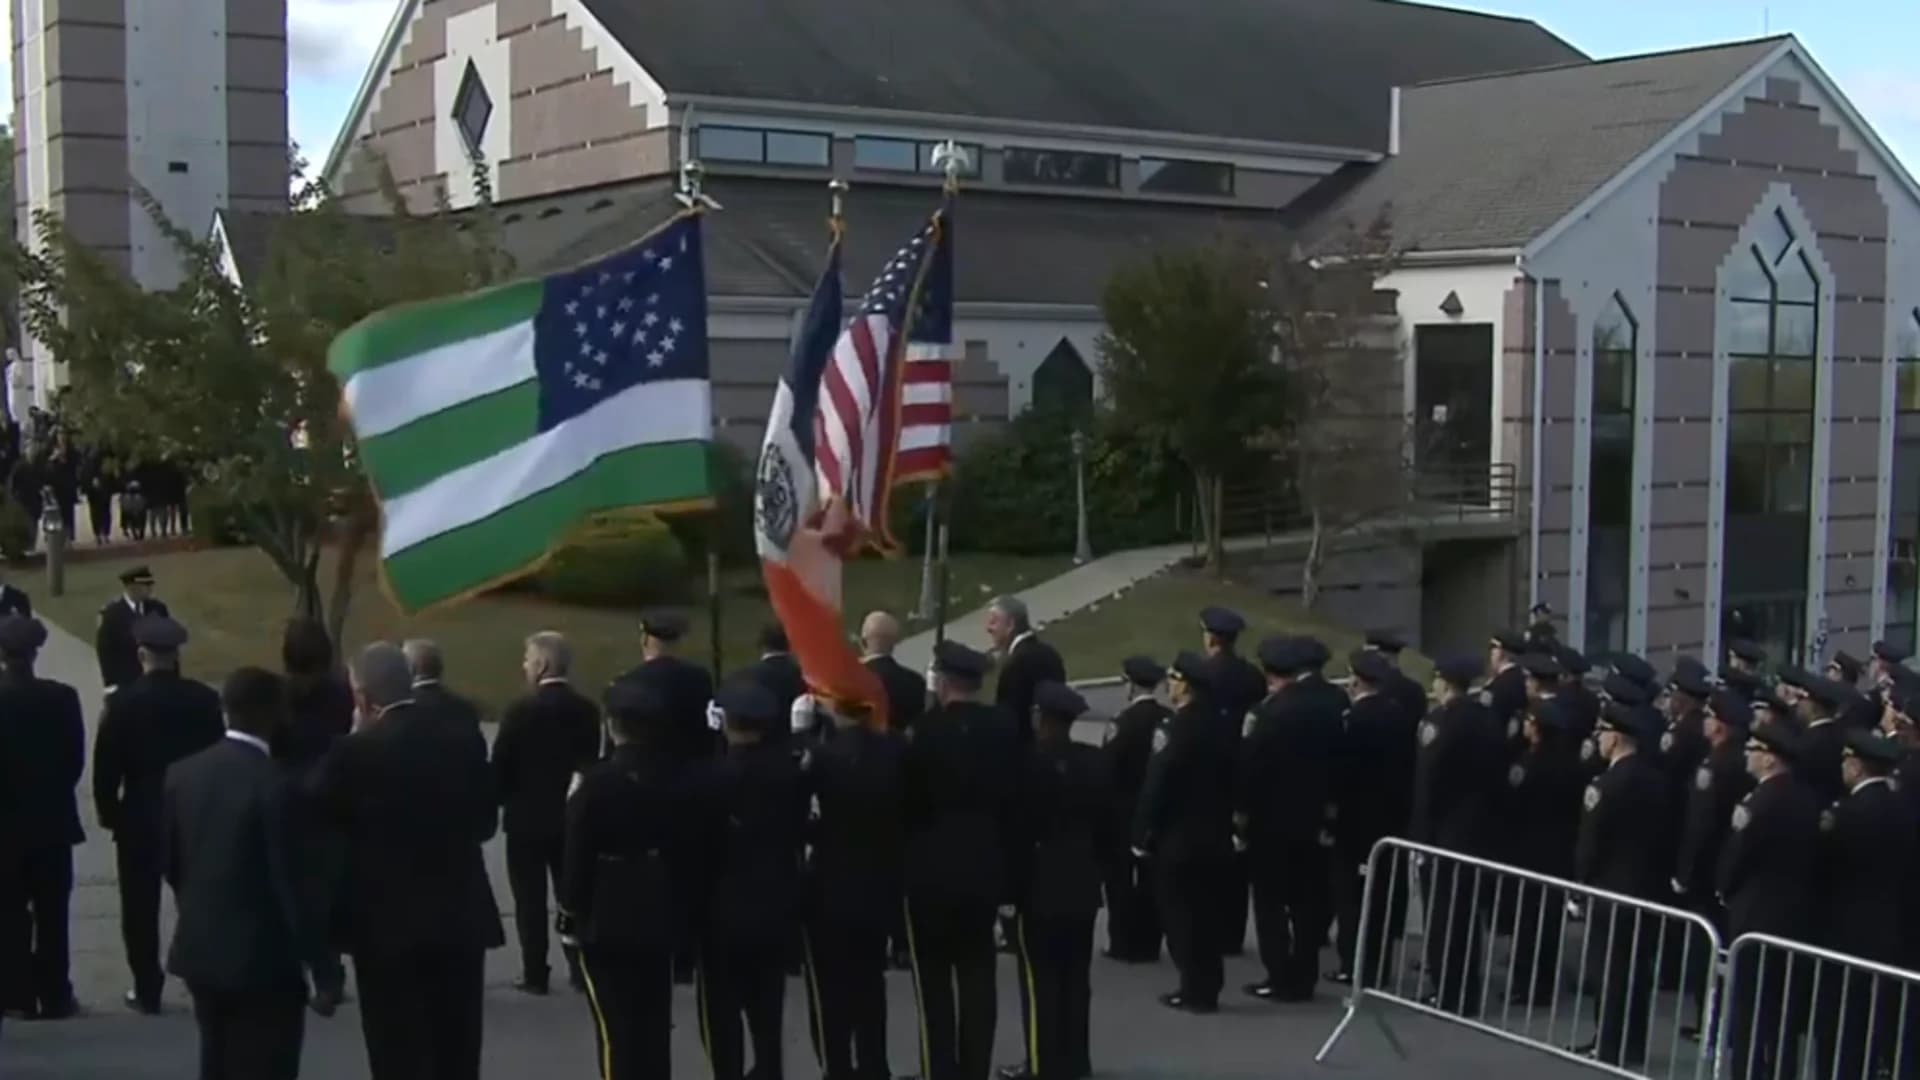 VIDEO: Thousands gather at funeral for NYPD Officer Brian Mulkeen